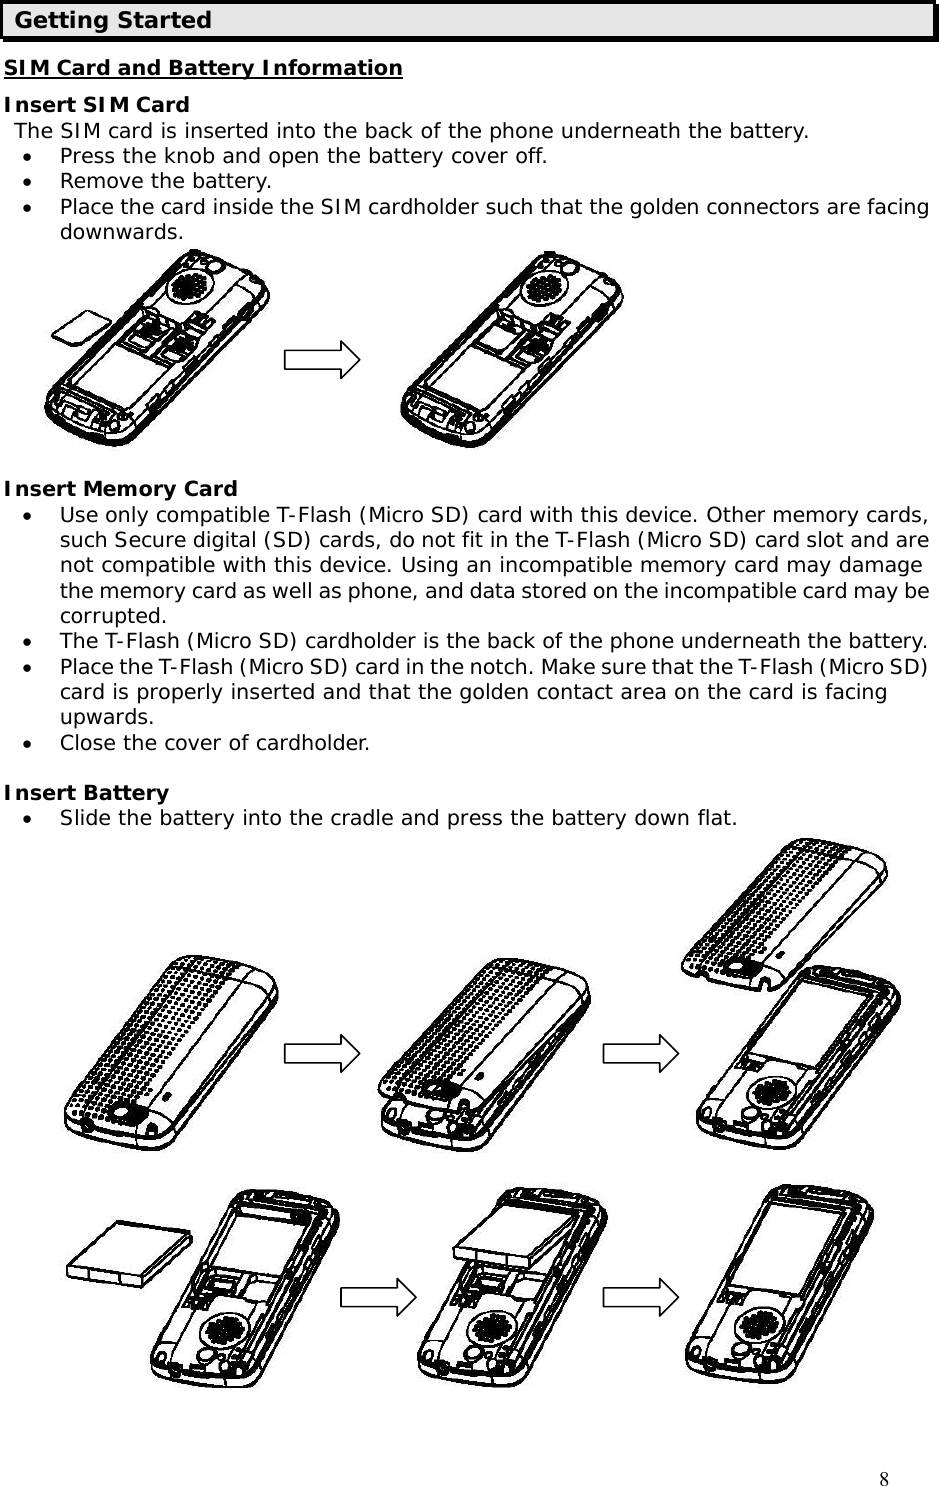                                     8 Getting Started SIM Card and Battery Information Insert SIM Card The SIM card is inserted into the back of the phone underneath the battery. • Press the knob and open the battery cover off.  • Remove the battery. • Place the card inside the SIM cardholder such that the golden connectors are facing downwards.                 Insert Memory Card • Use only compatible T-Flash (Micro SD) card with this device. Other memory cards, such Secure digital (SD) cards, do not fit in the T-Flash (Micro SD) card slot and are not compatible with this device. Using an incompatible memory card may damage the memory card as well as phone, and data stored on the incompatible card may be corrupted.  • The T-Flash (Micro SD) cardholder is the back of the phone underneath the battery.  • Place the T-Flash (Micro SD) card in the notch. Make sure that the T-Flash (Micro SD) card is properly inserted and that the golden contact area on the card is facing upwards. • Close the cover of cardholder.  Insert Battery • Slide the battery into the cradle and press the battery down flat.                                          